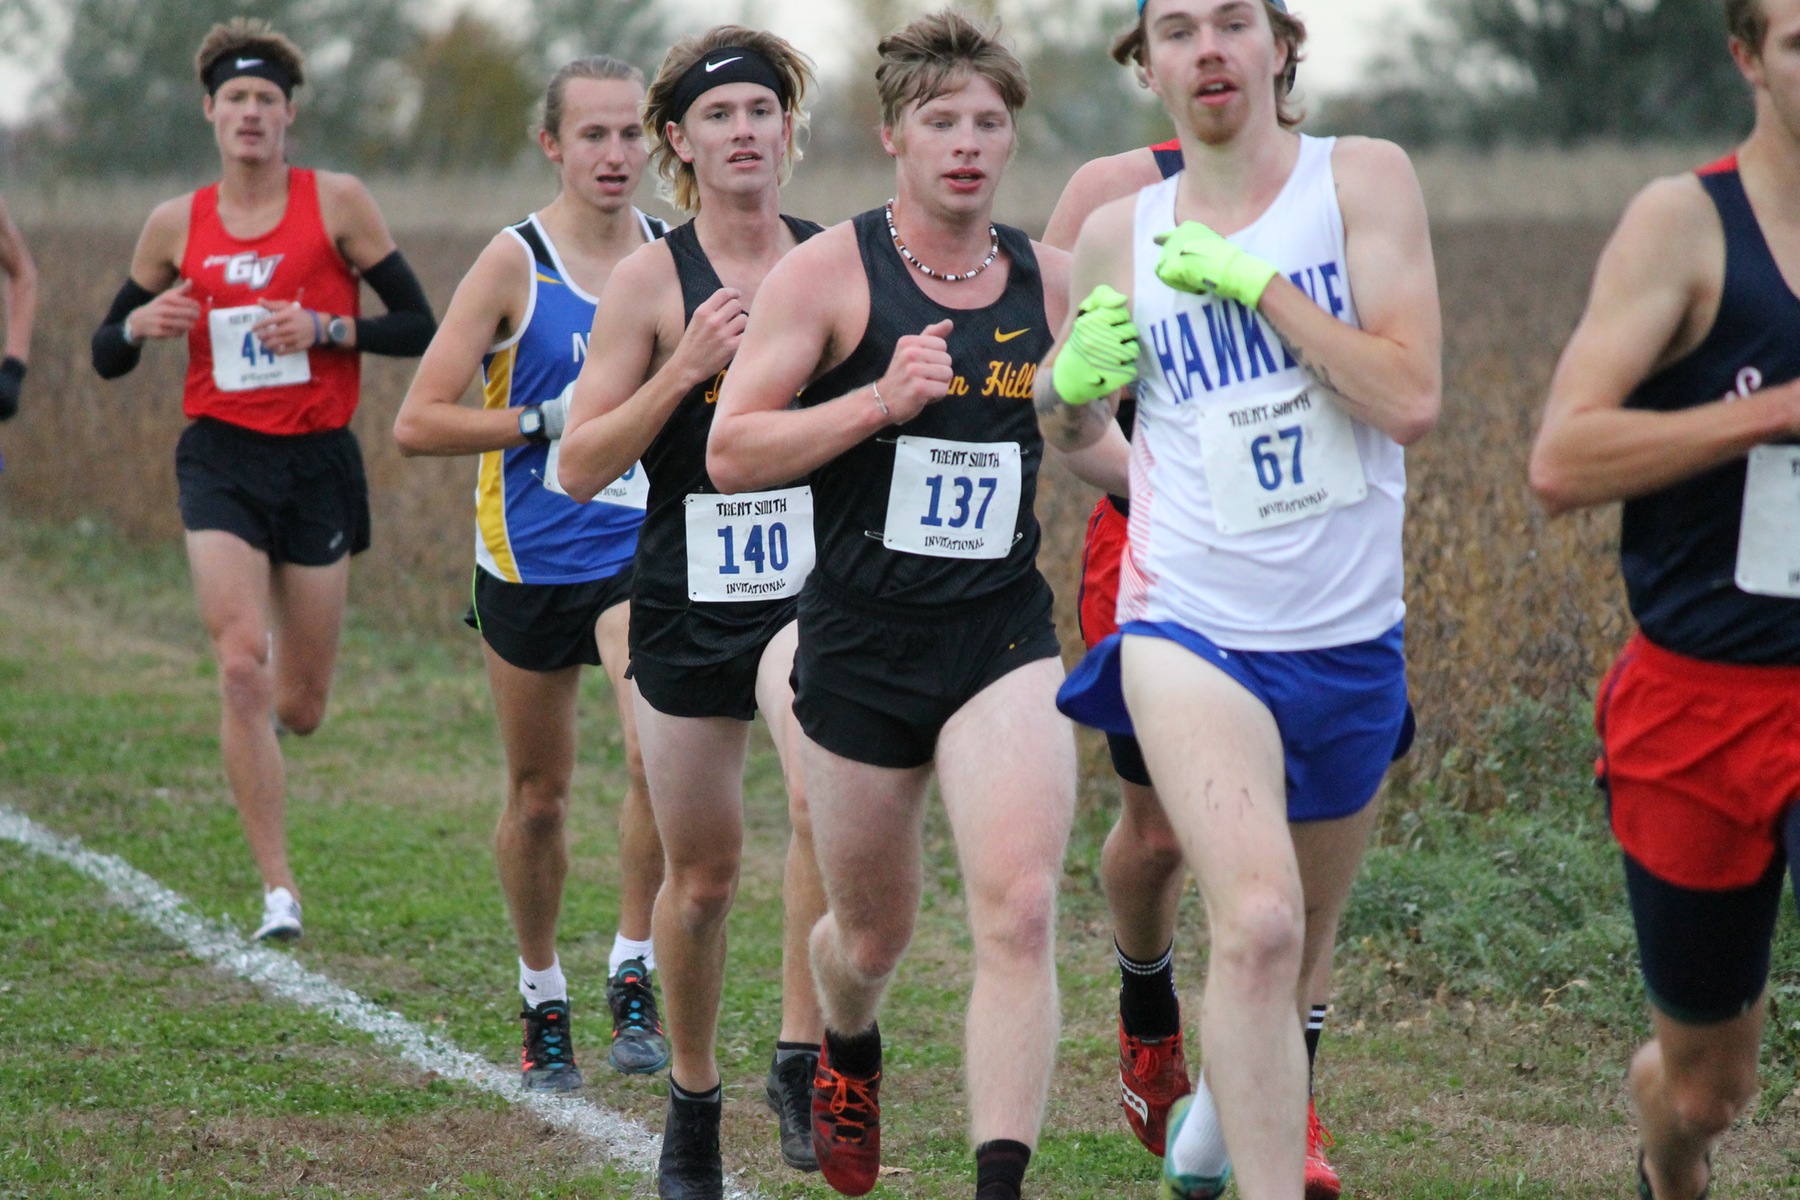 Freshmen Zach Schocker & Drake VanBaale race their way to a pair of top-20 finishes at the Trent Smith Invite.